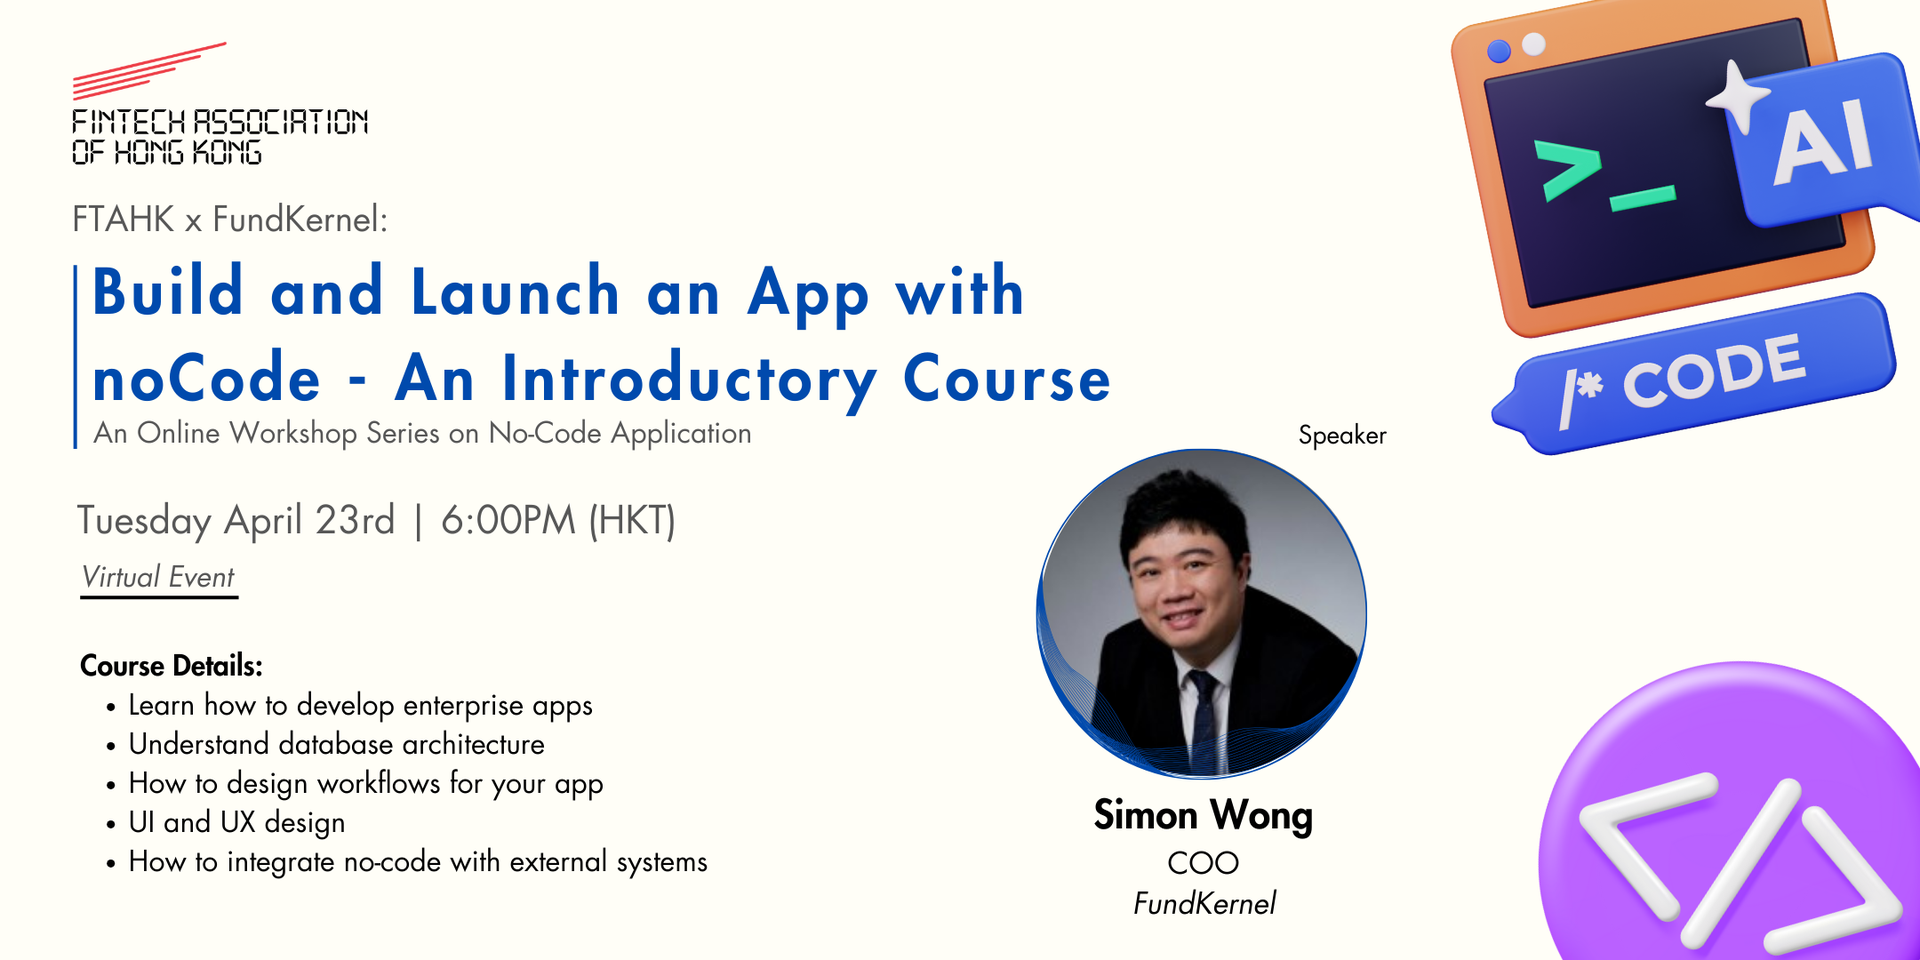 thumbnails FTAHK x FundKernel No-Code Education Series: Build & Launch an App with noCode - An Introductory Course (2nd Session)